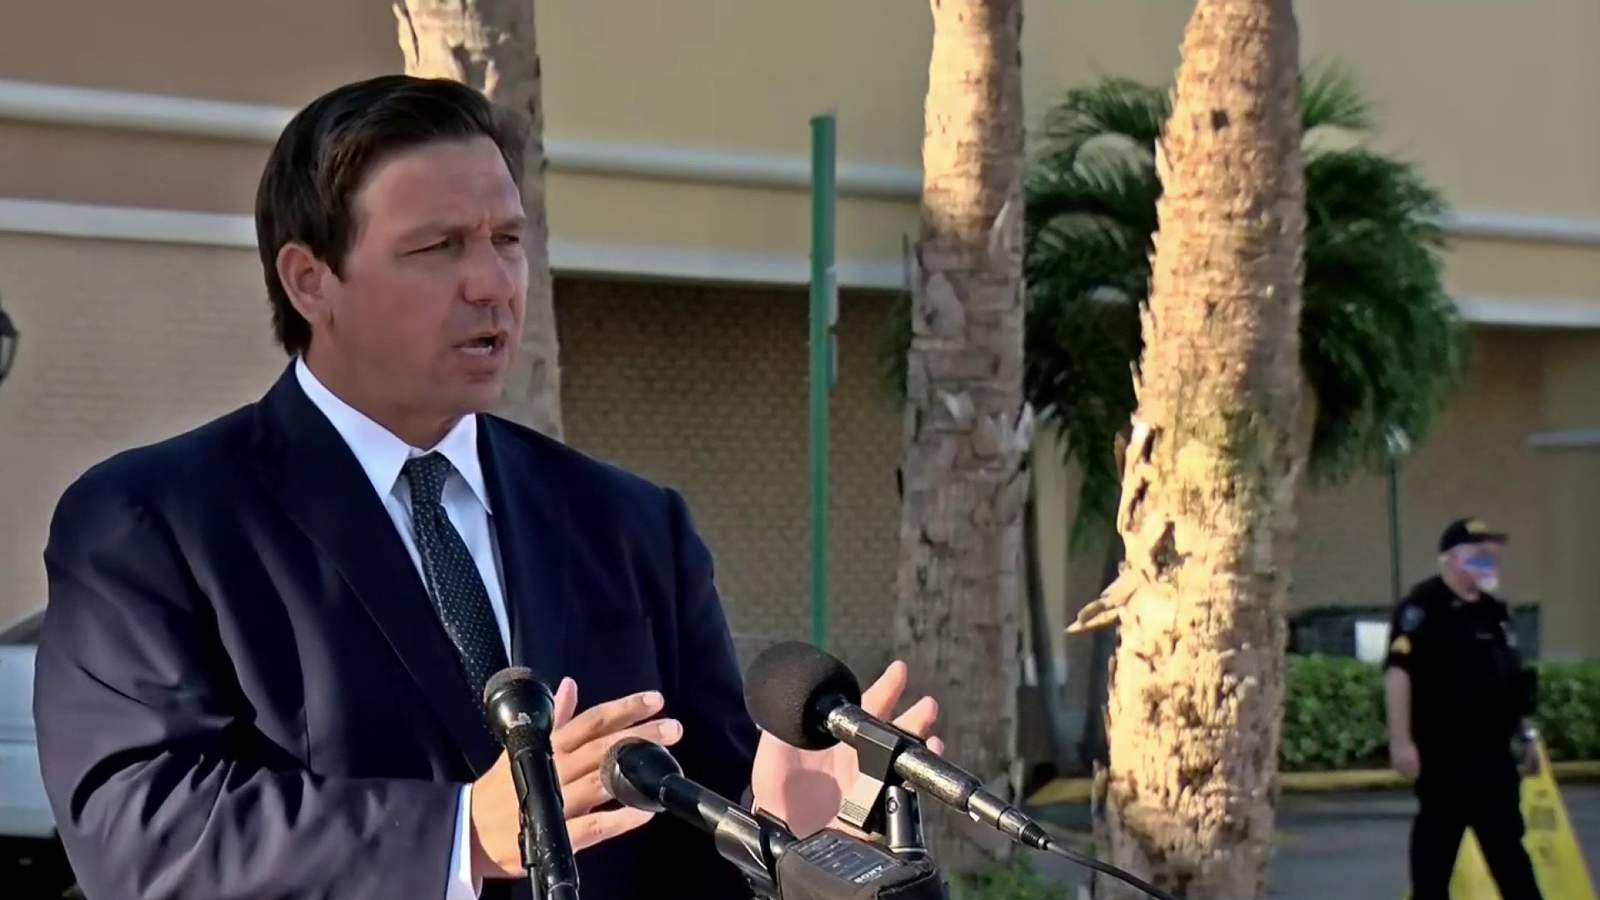 Gov. DeSantis says Florida will see increase in number of COVID-19 vaccines delivered to state